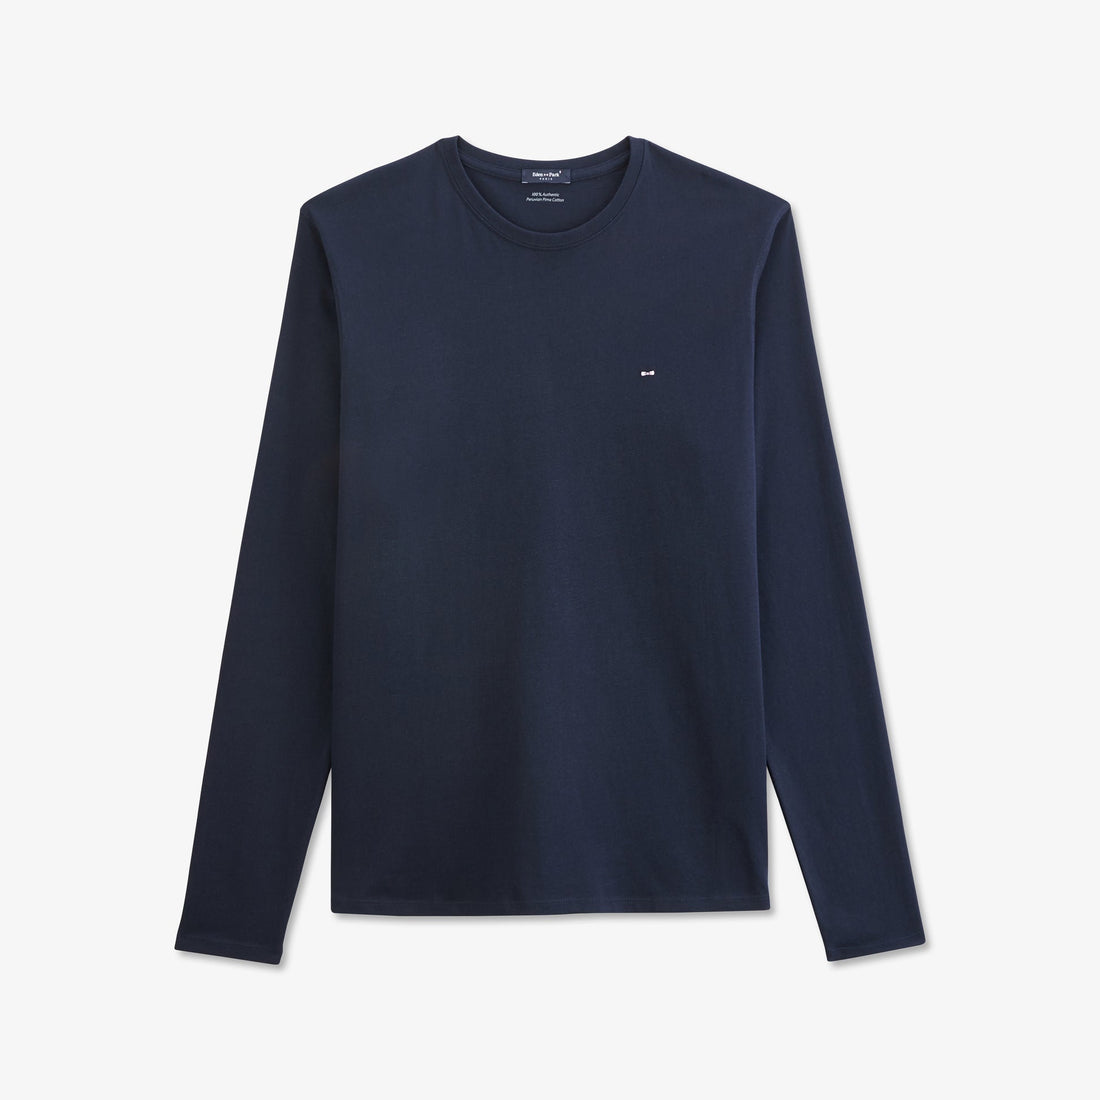 Long Sleeved Navy Blue Cotton T-Shirt_PPKNITLE0007_BLF_02